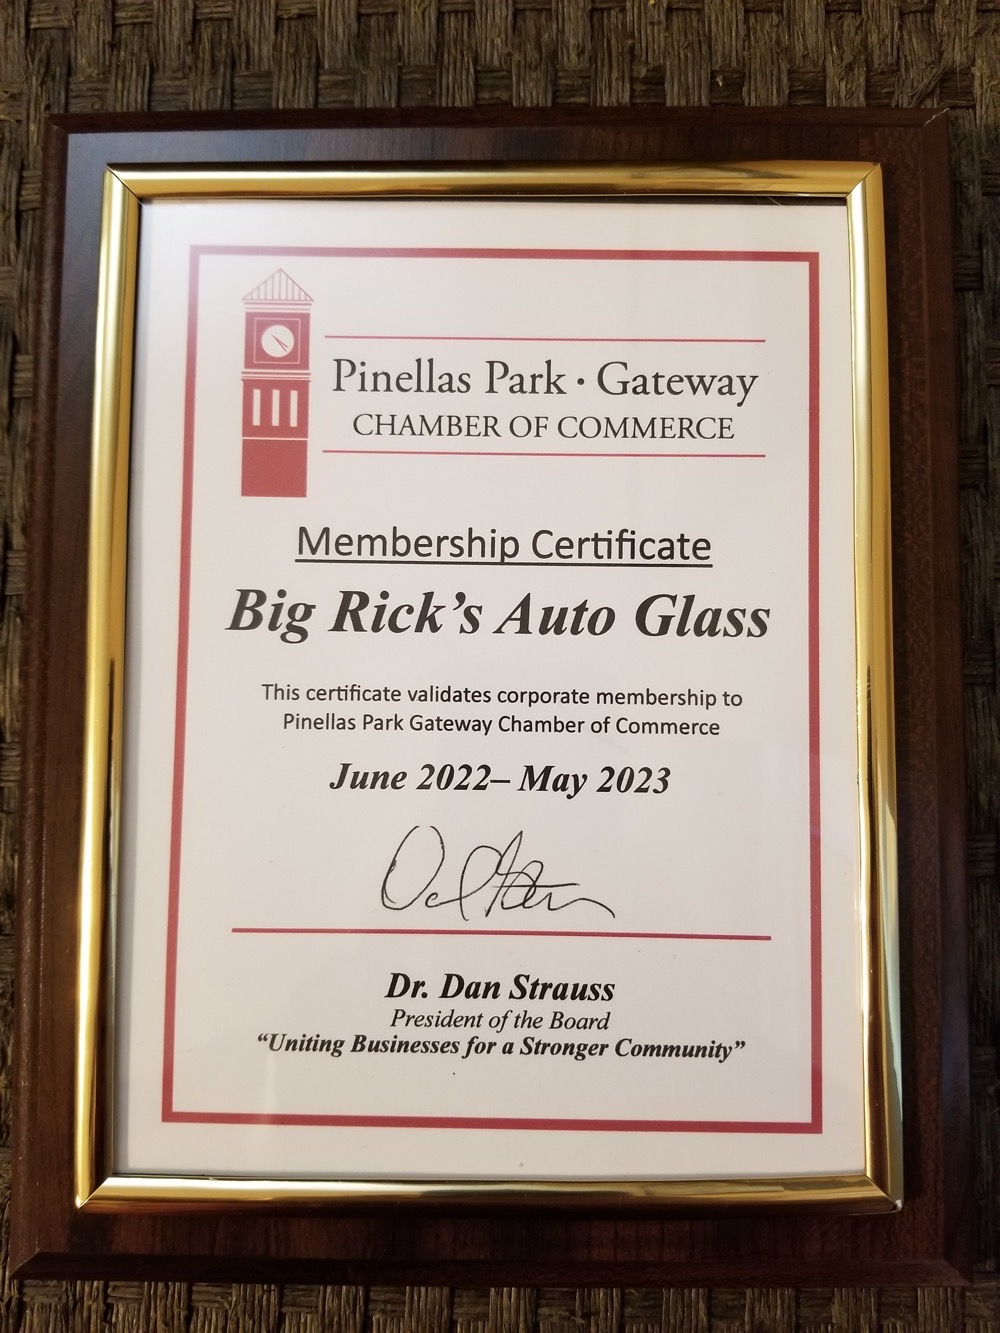 Pinellas Park Gateway Chamber of Commerce